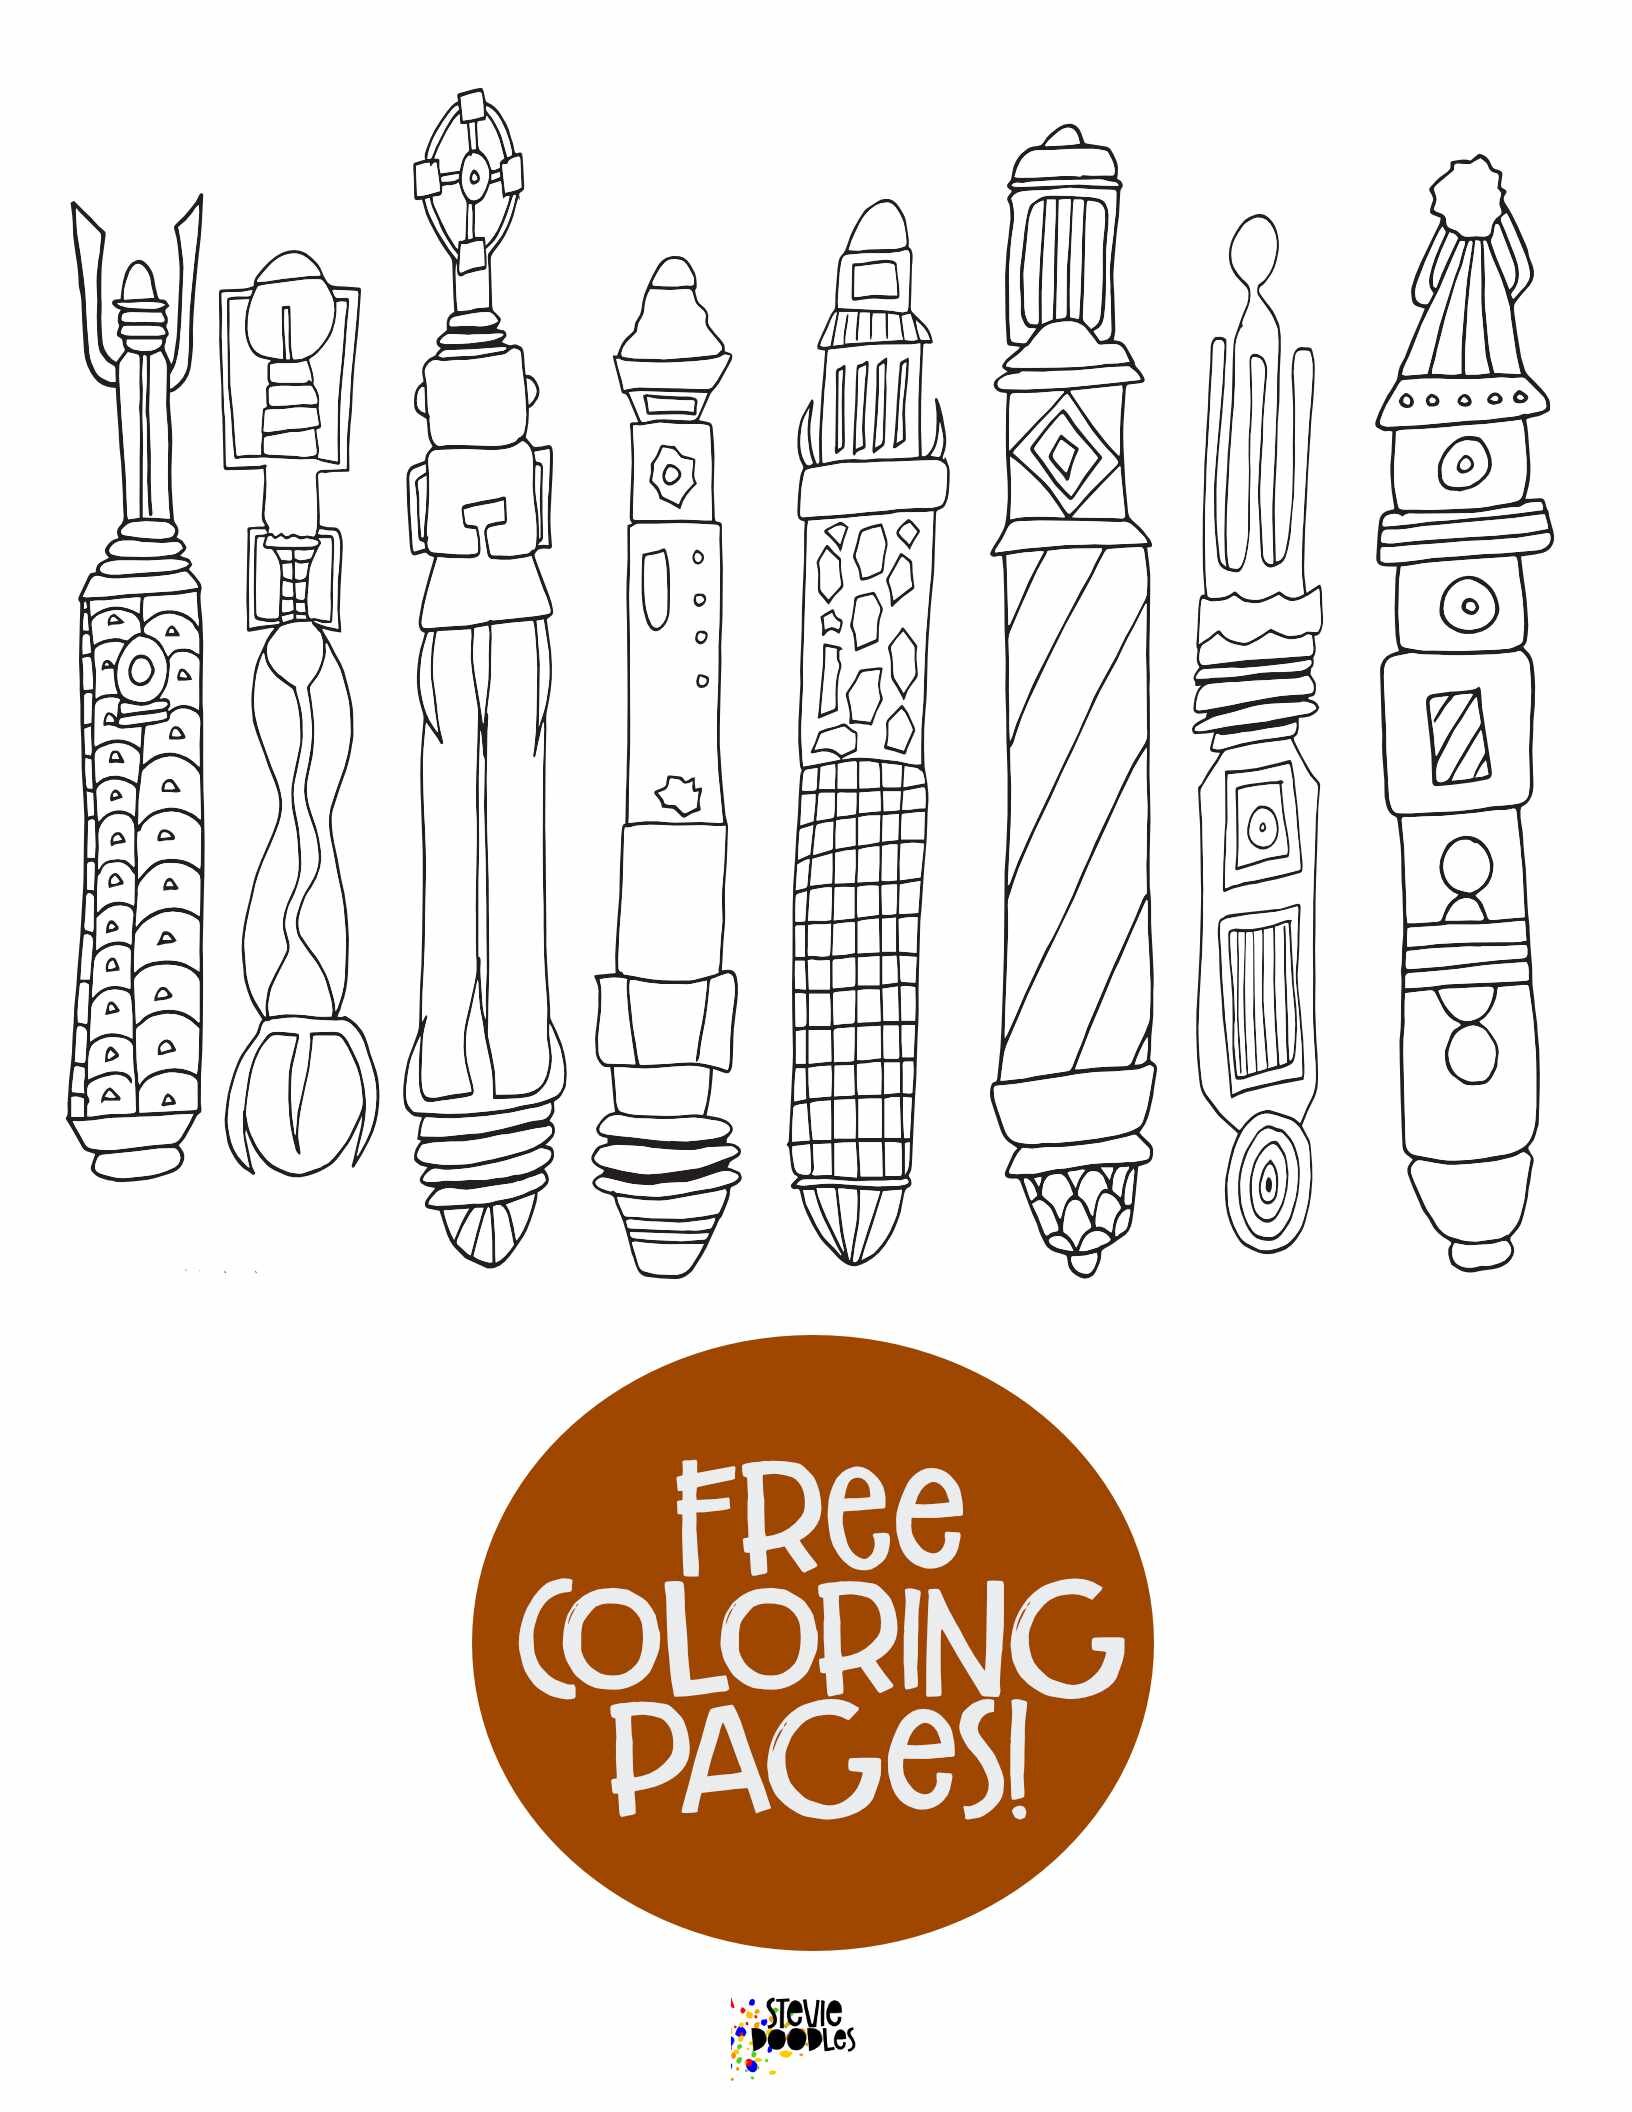 SONIC SCREWDRIVERS - Free DR WHO Printable Coloring Page Over 1000 free printable coloring pages